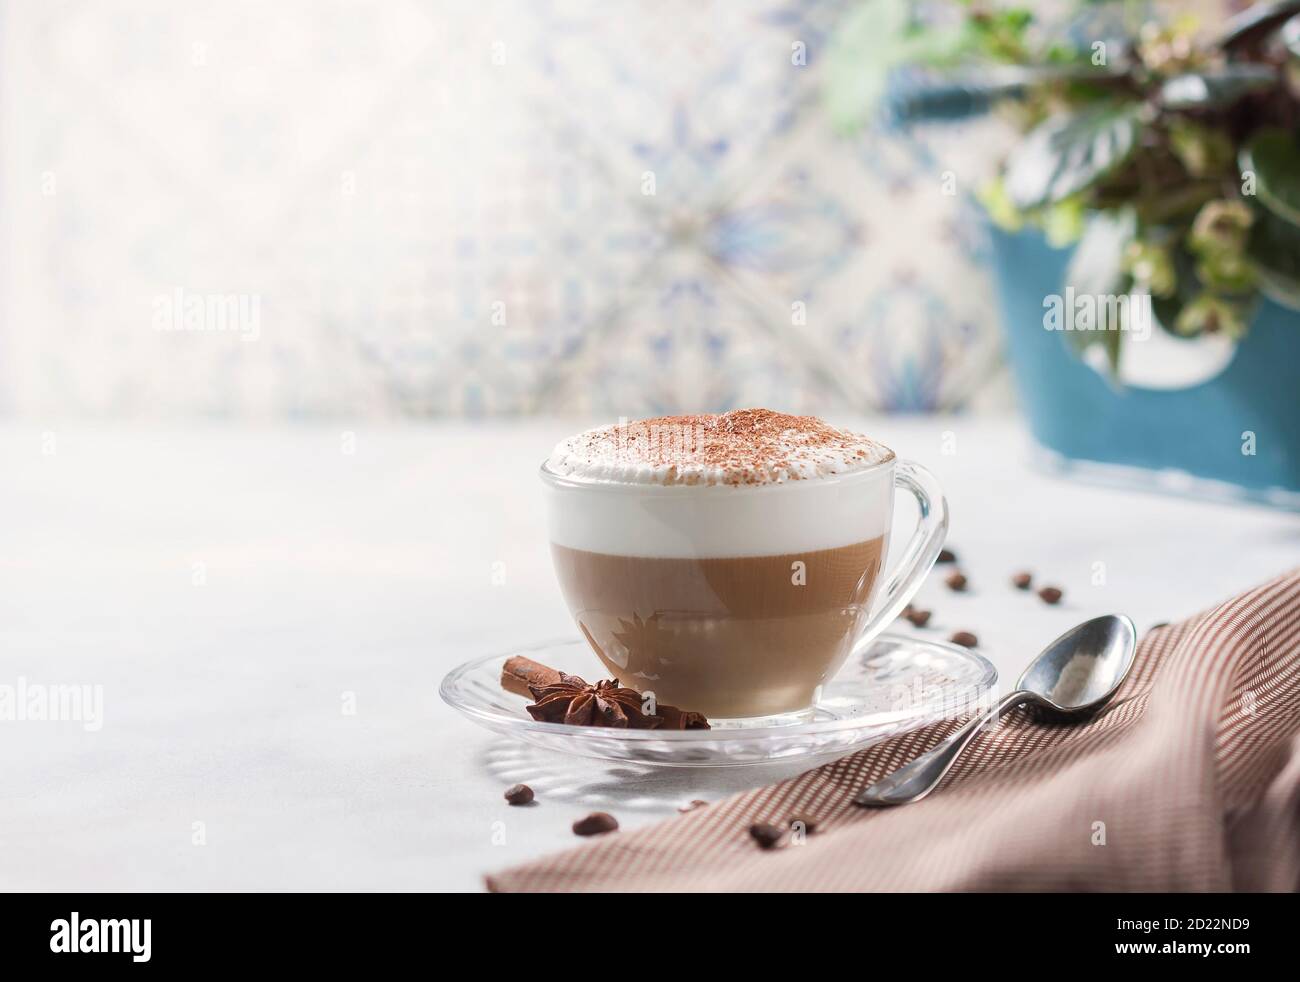 Cappuccino or latte in a glass cup on a light background. Stock Photo